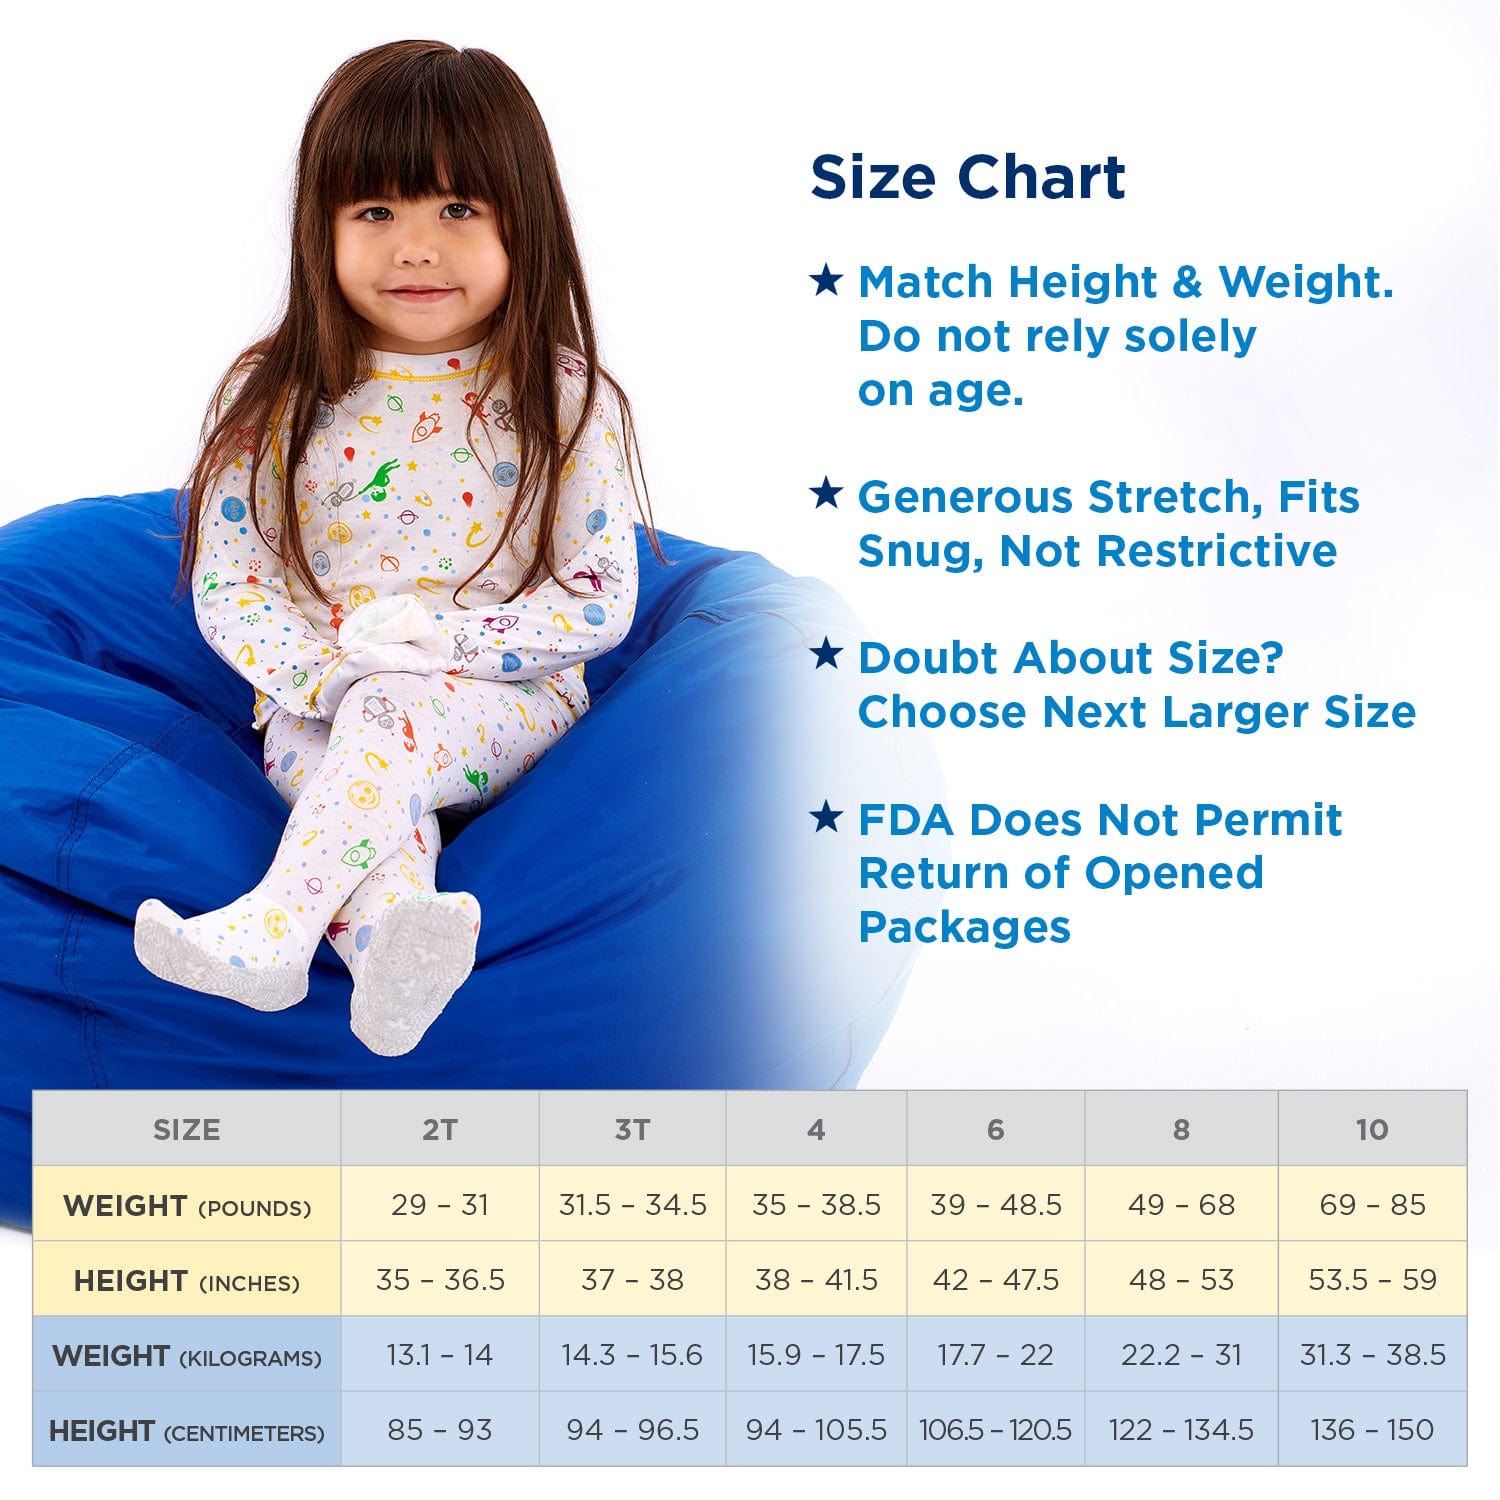 “Eczema Pajamas for Toddlers and Kids in Sizes 2T, 3T, 4, 6, 8, 10 for Wet Wrap Therapy”